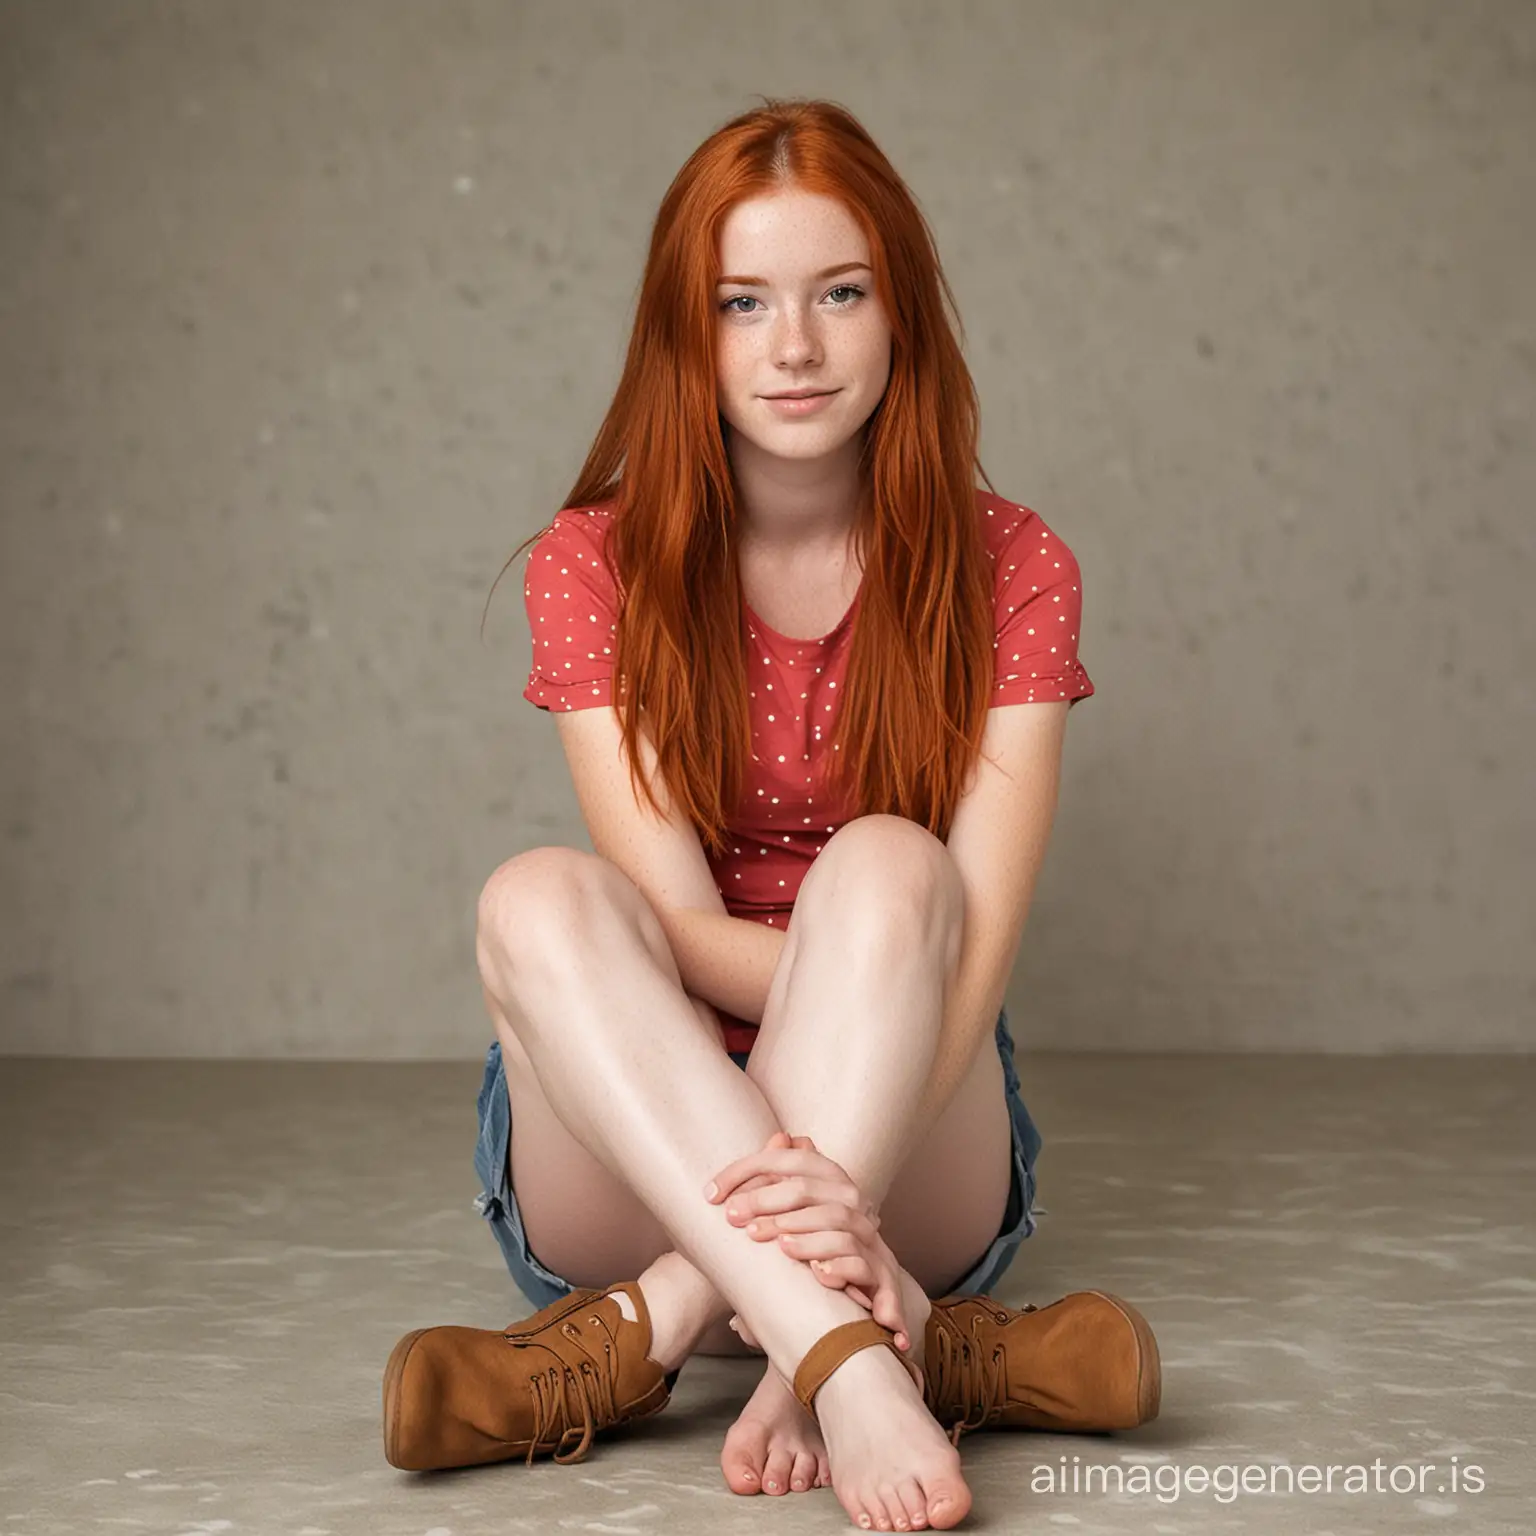 Teen redhead with freckles sitting with legs crossed